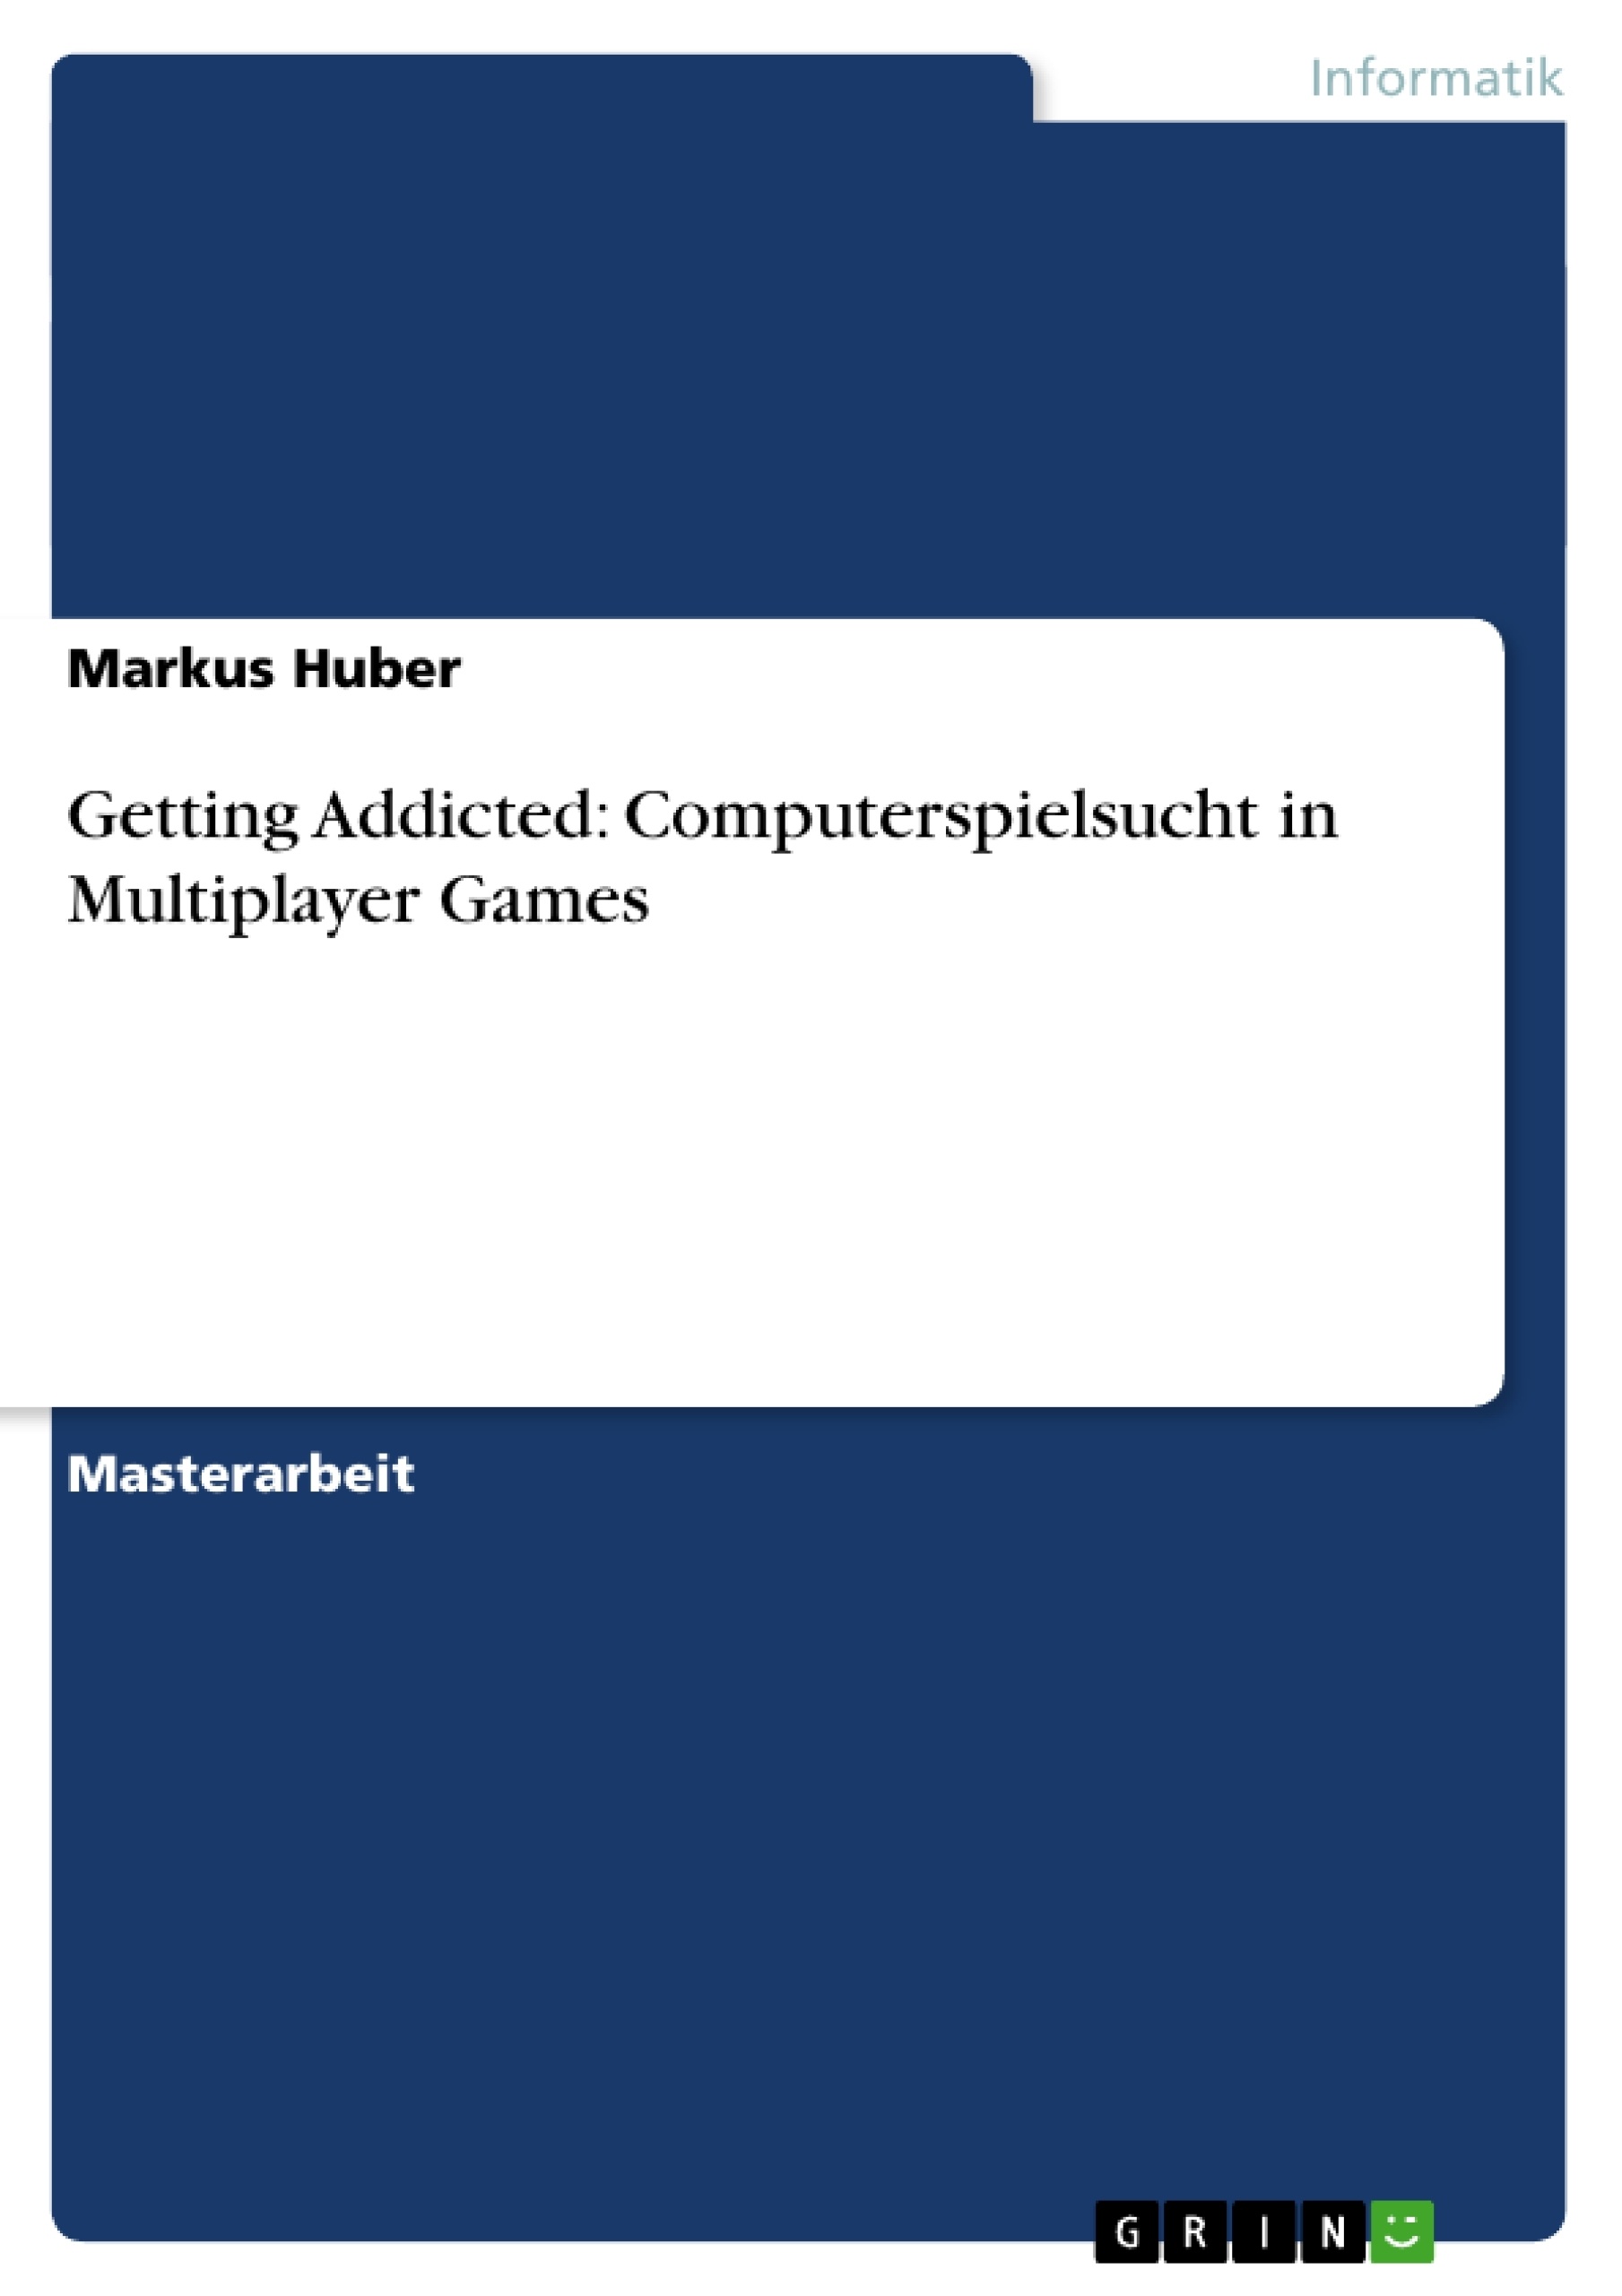 Title: Getting Addicted: Computerspielsucht in Multiplayer Games